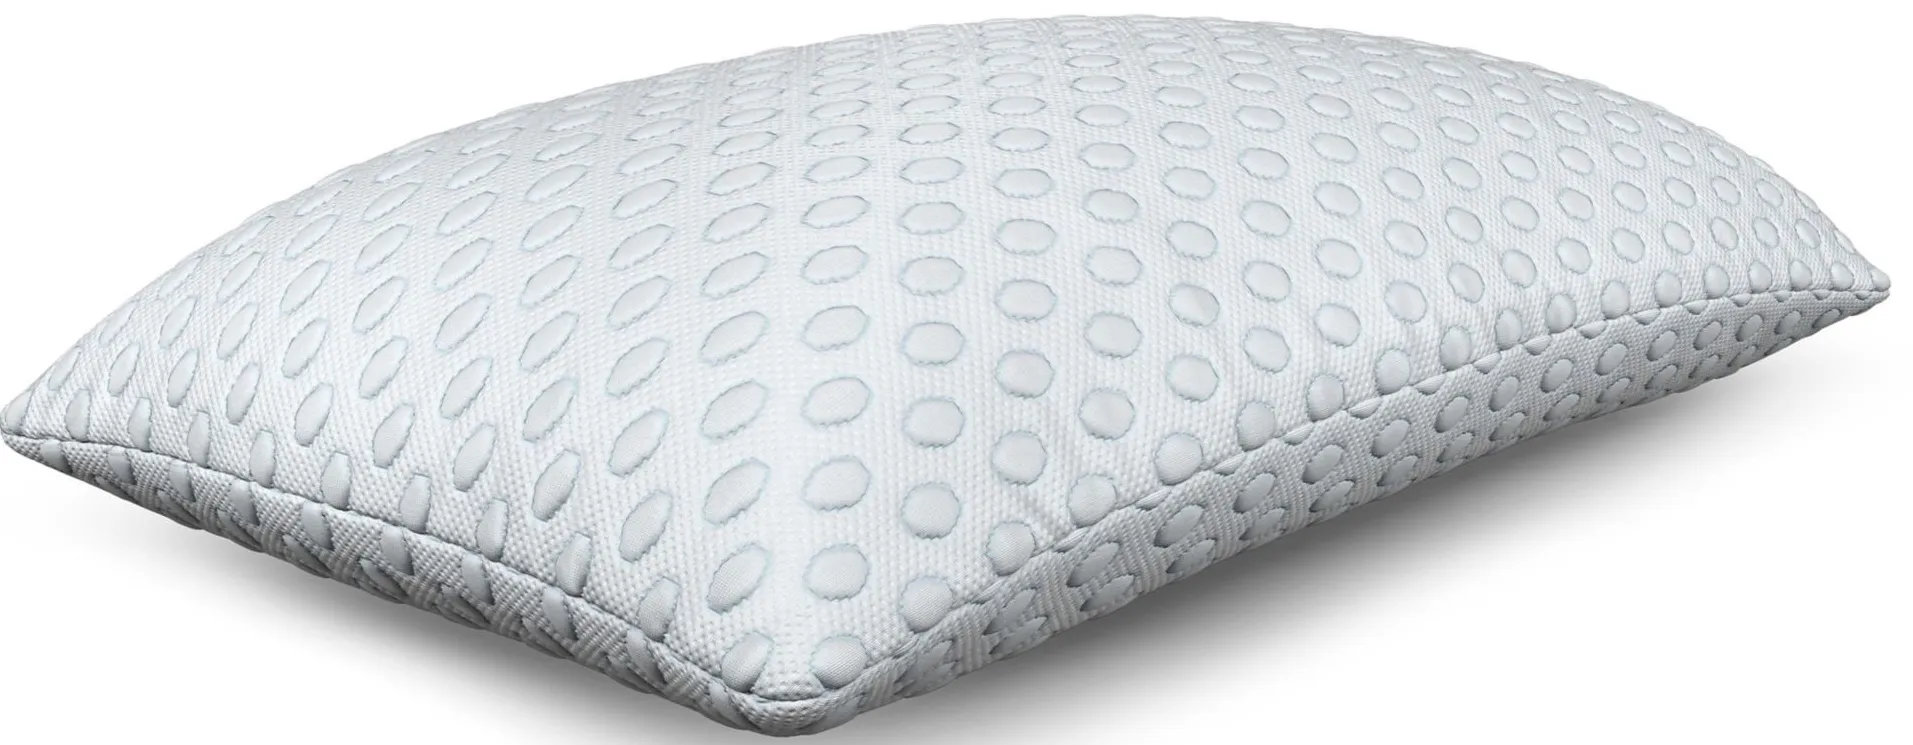 PureCare Cooling Fiber Pillow in White by PureCare